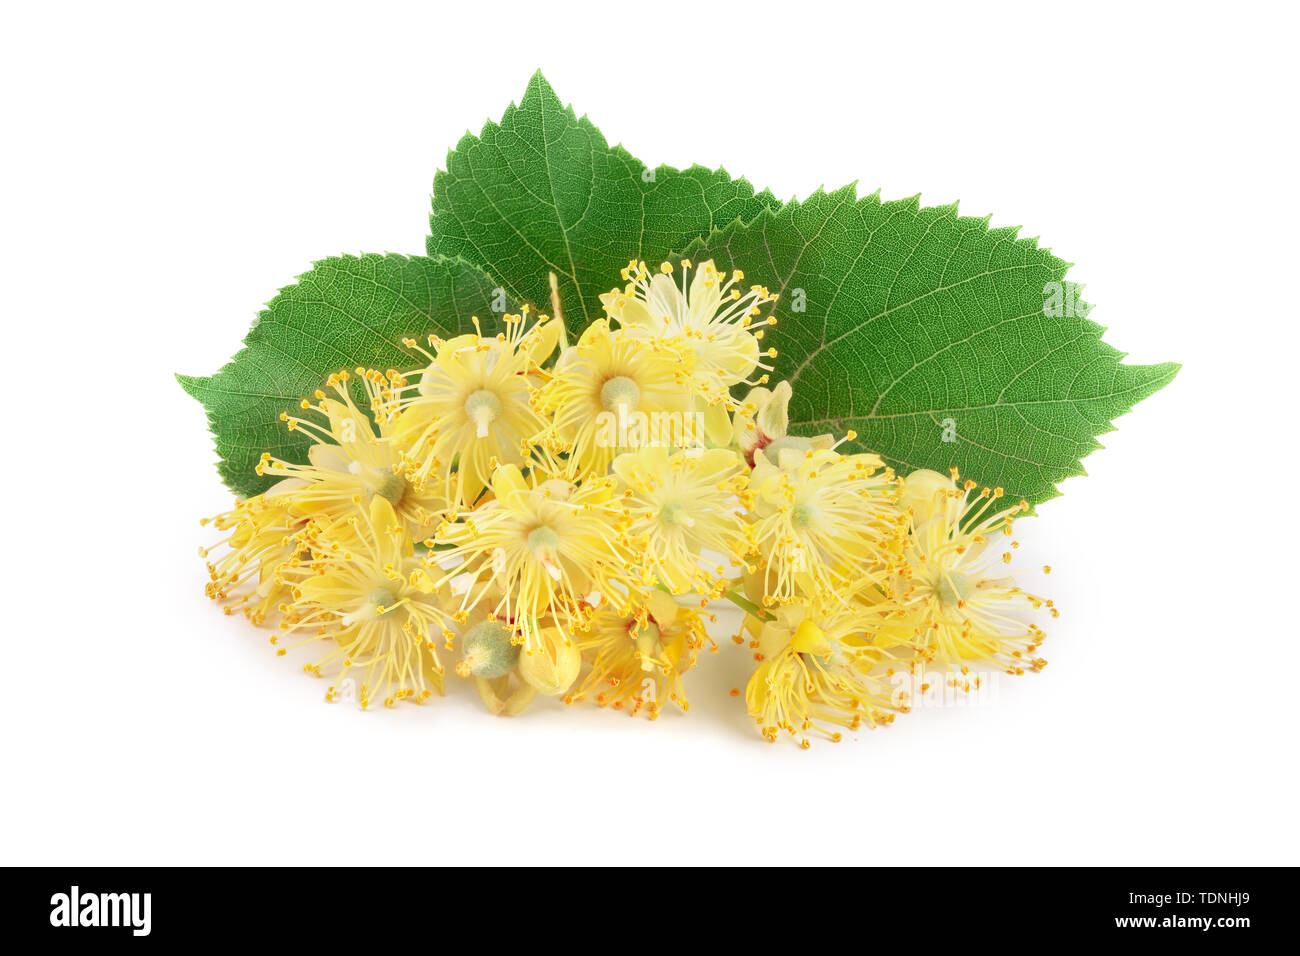 Linden flowers with leaf isolated on white background. Stock Photo